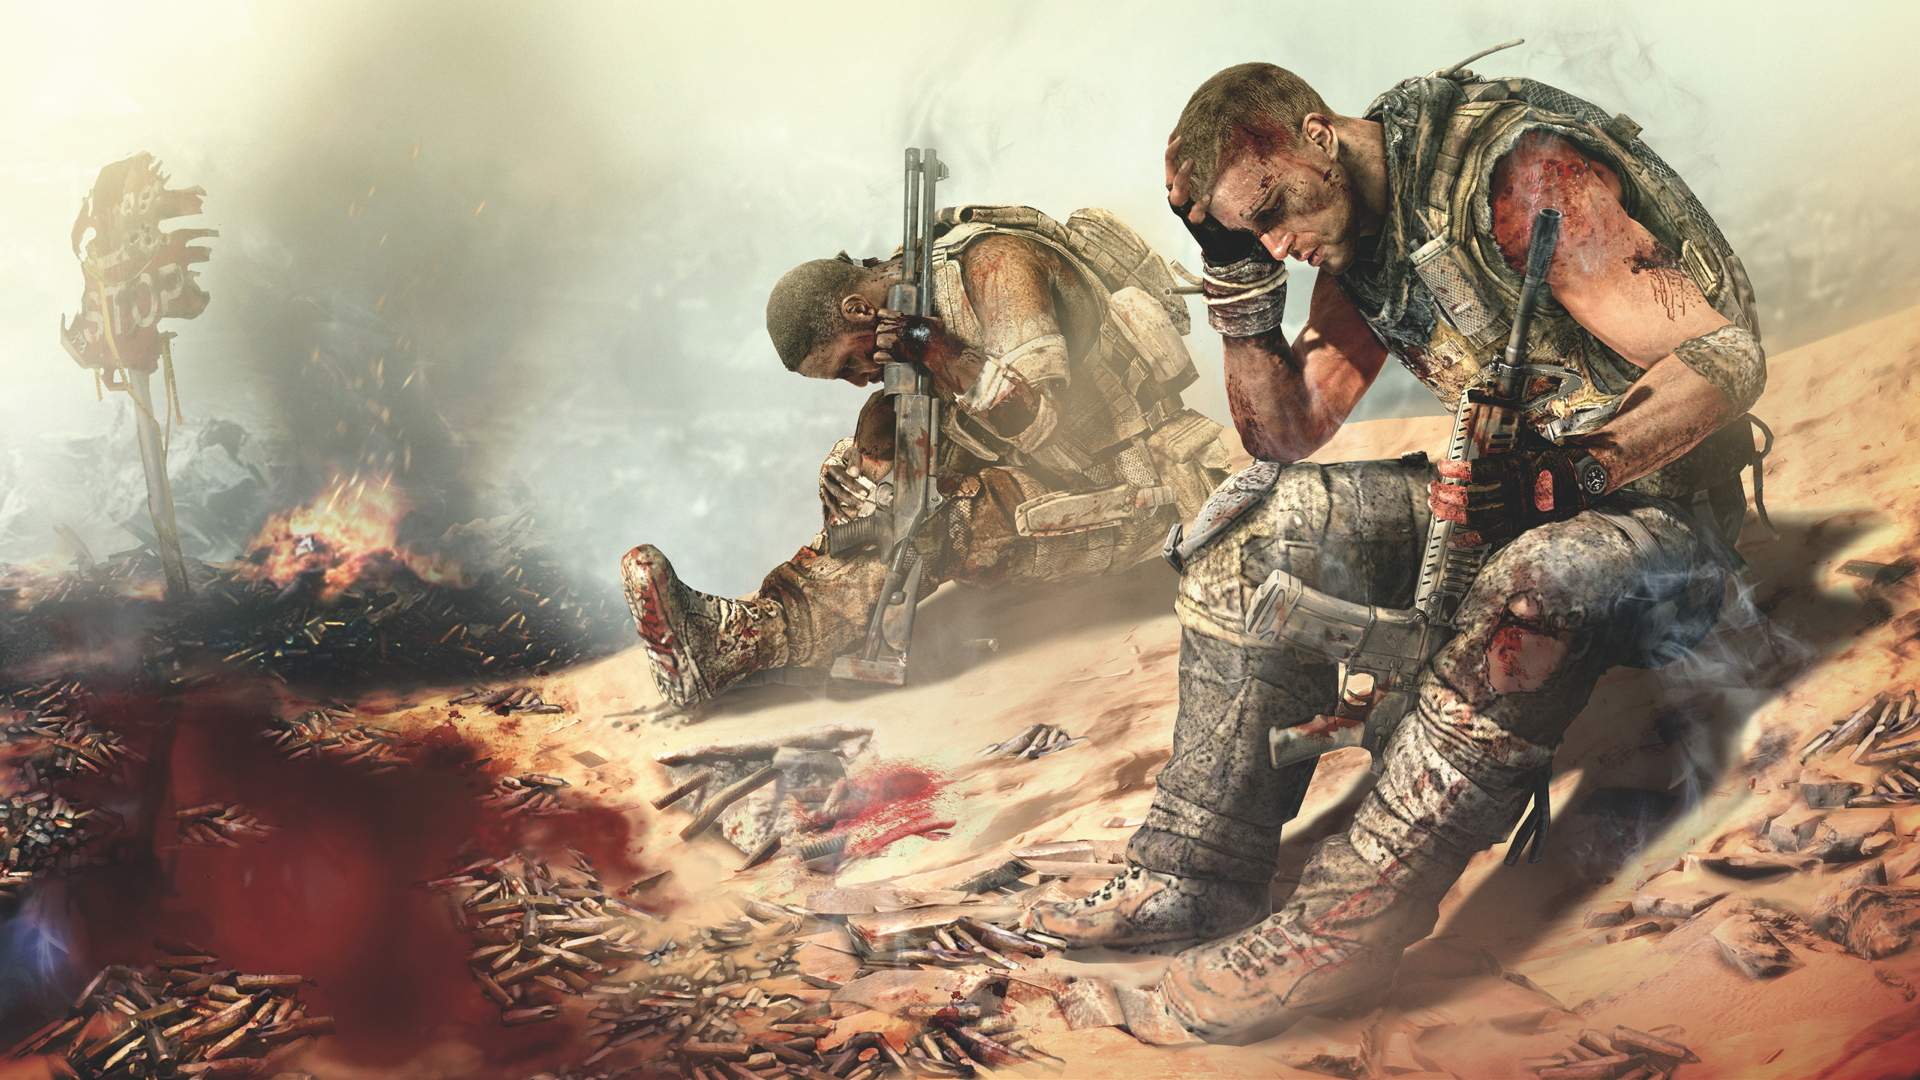 video games based on books - Spec Ops: The Line video game screenshot